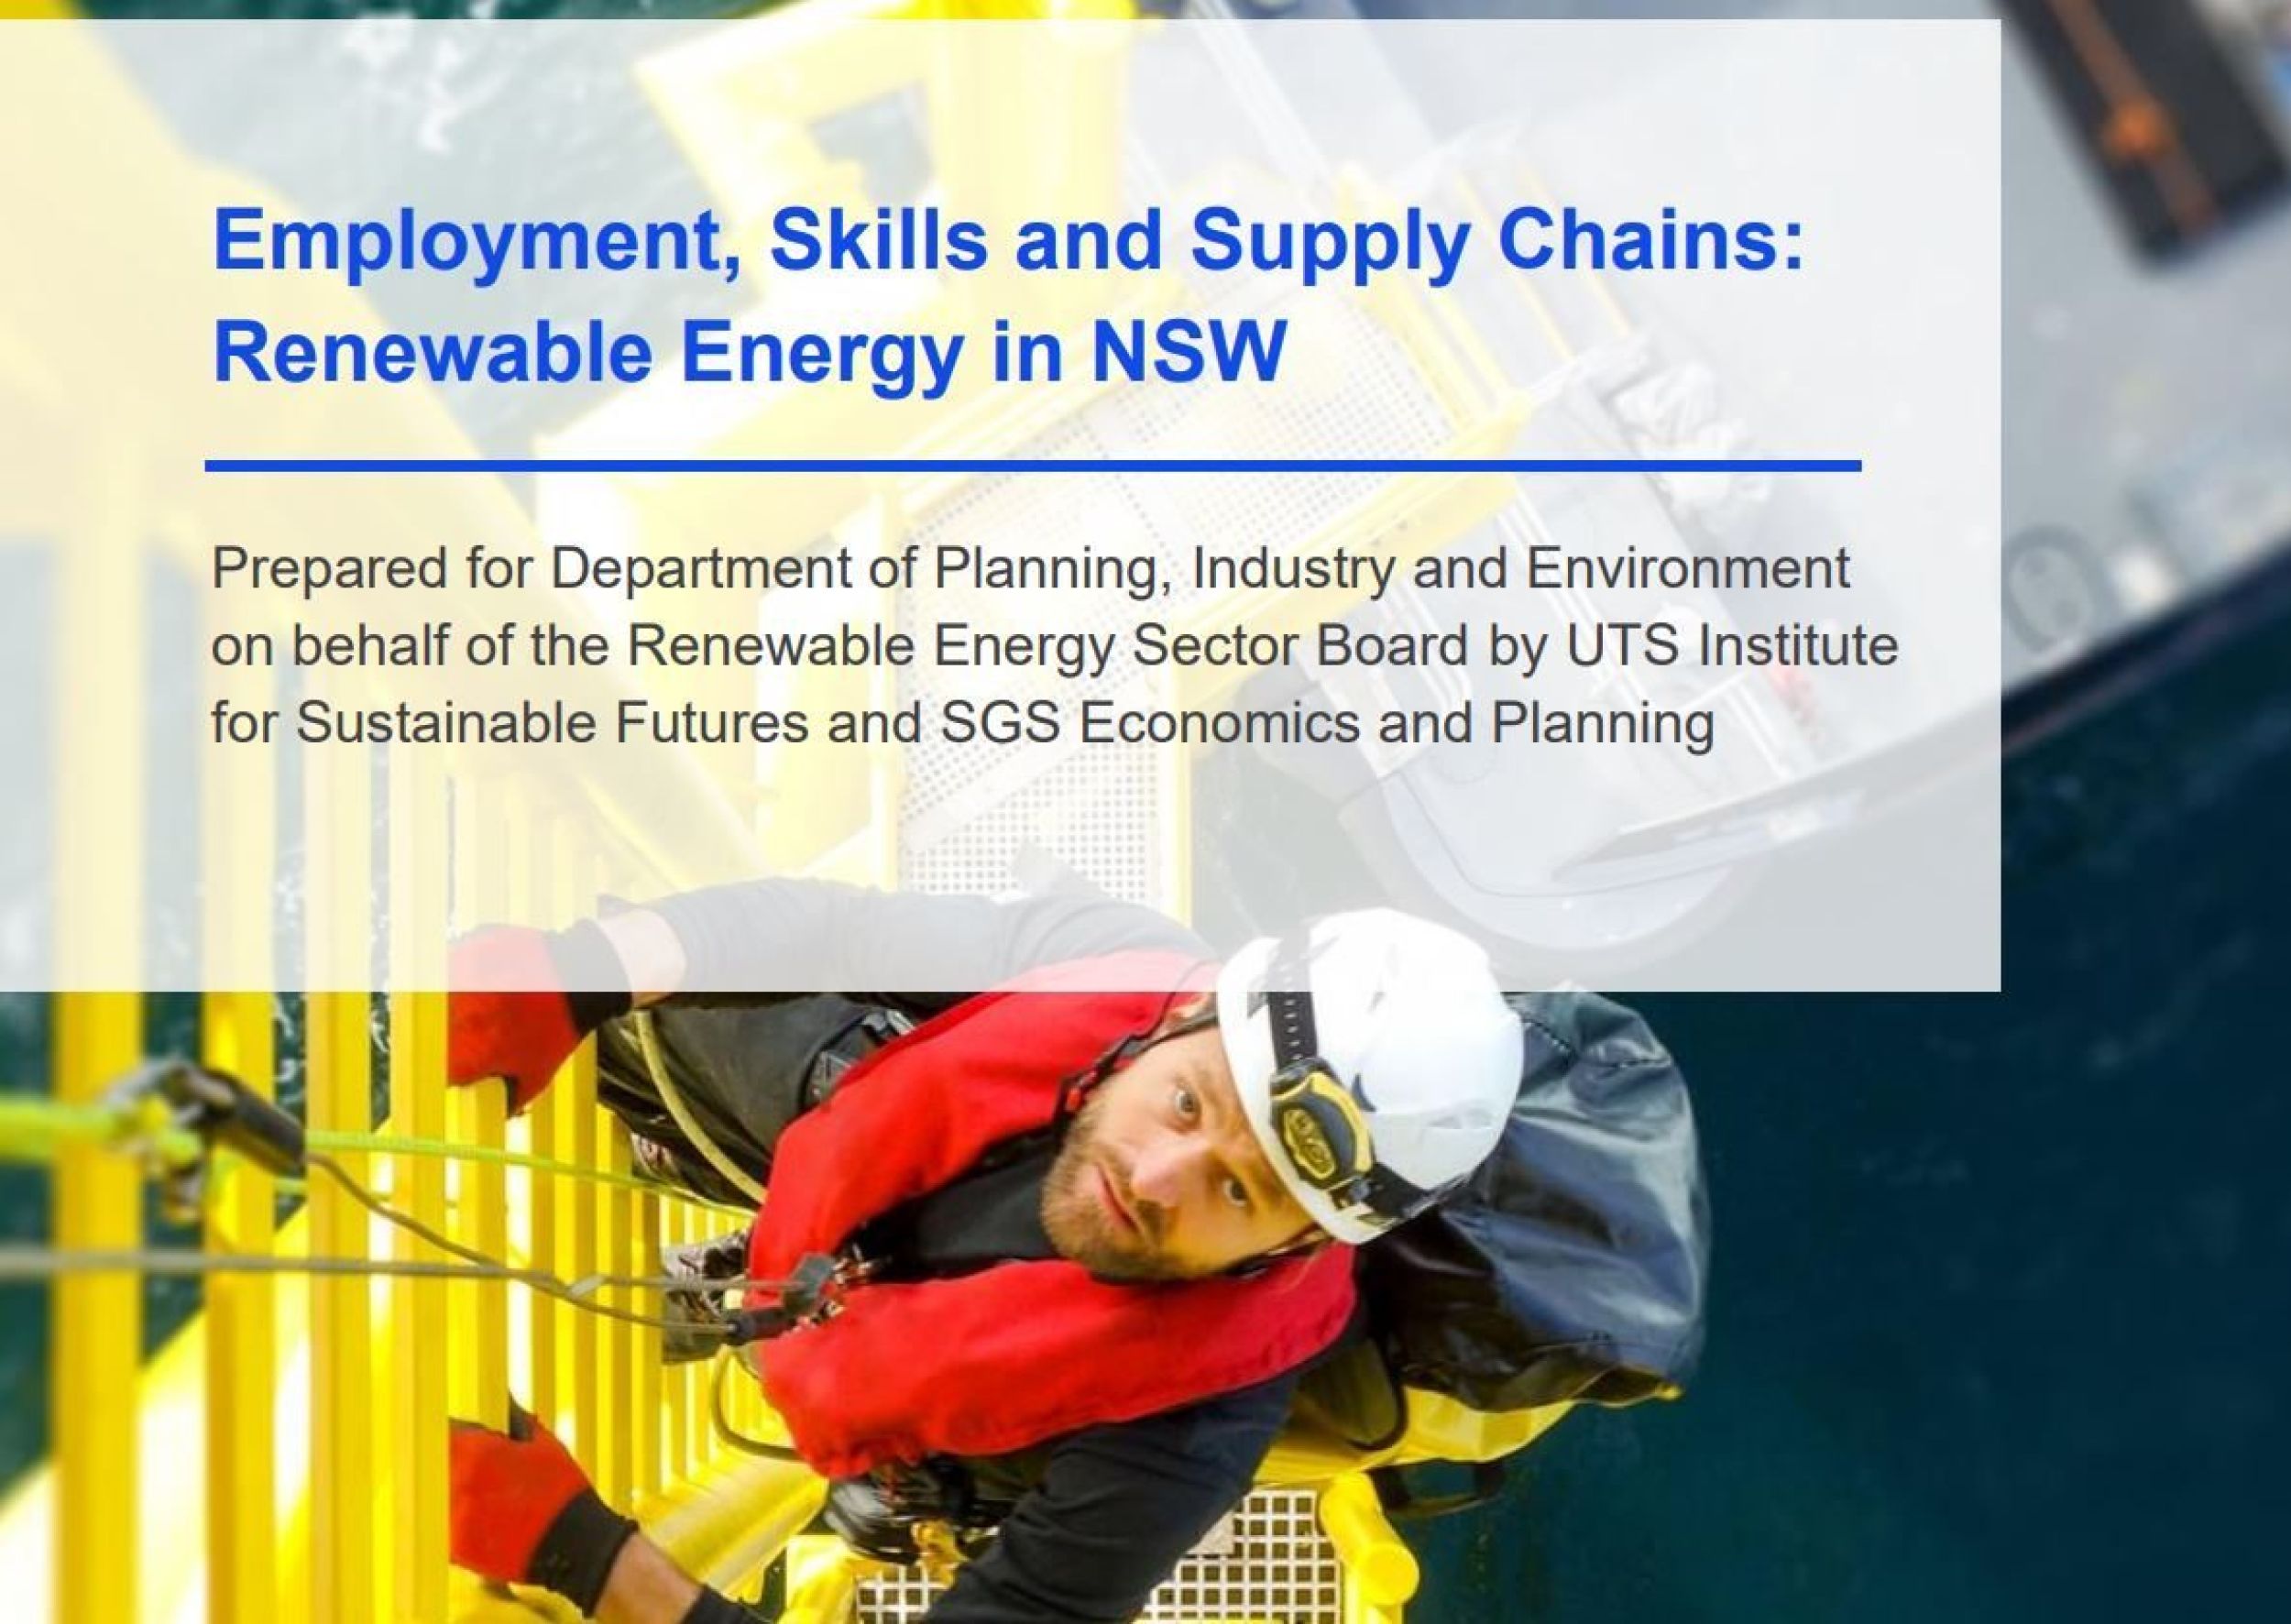 SGS Economics and Planning employment skills and supply chains renewable energy in nsw final report image